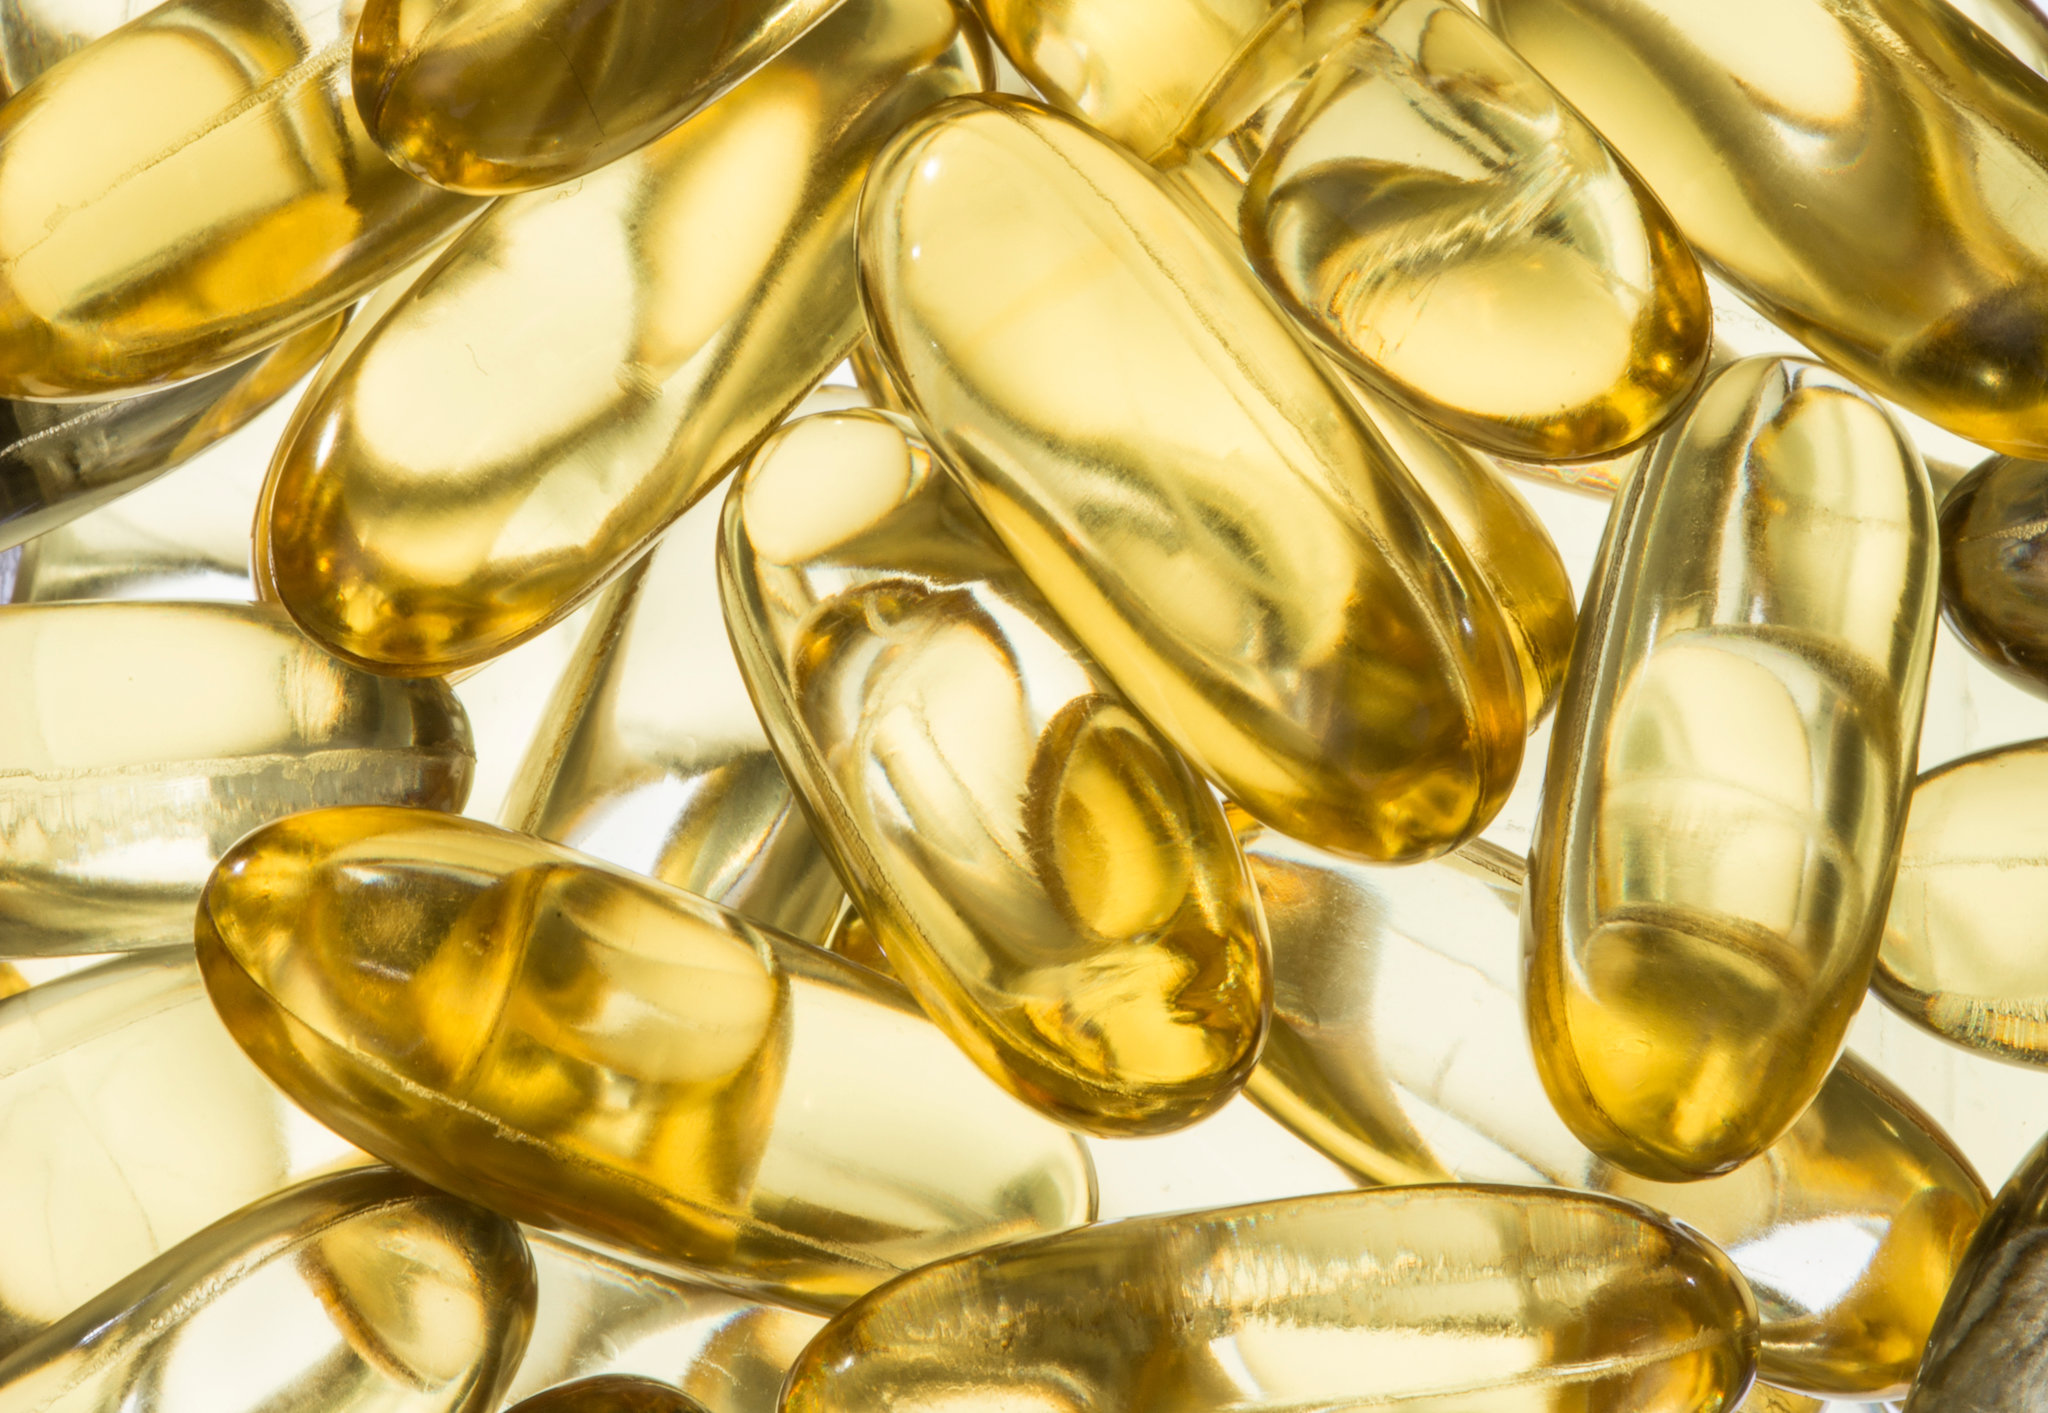 You are currently viewing Cod Liver Oil History: How This Supplement has been Used Over the Years